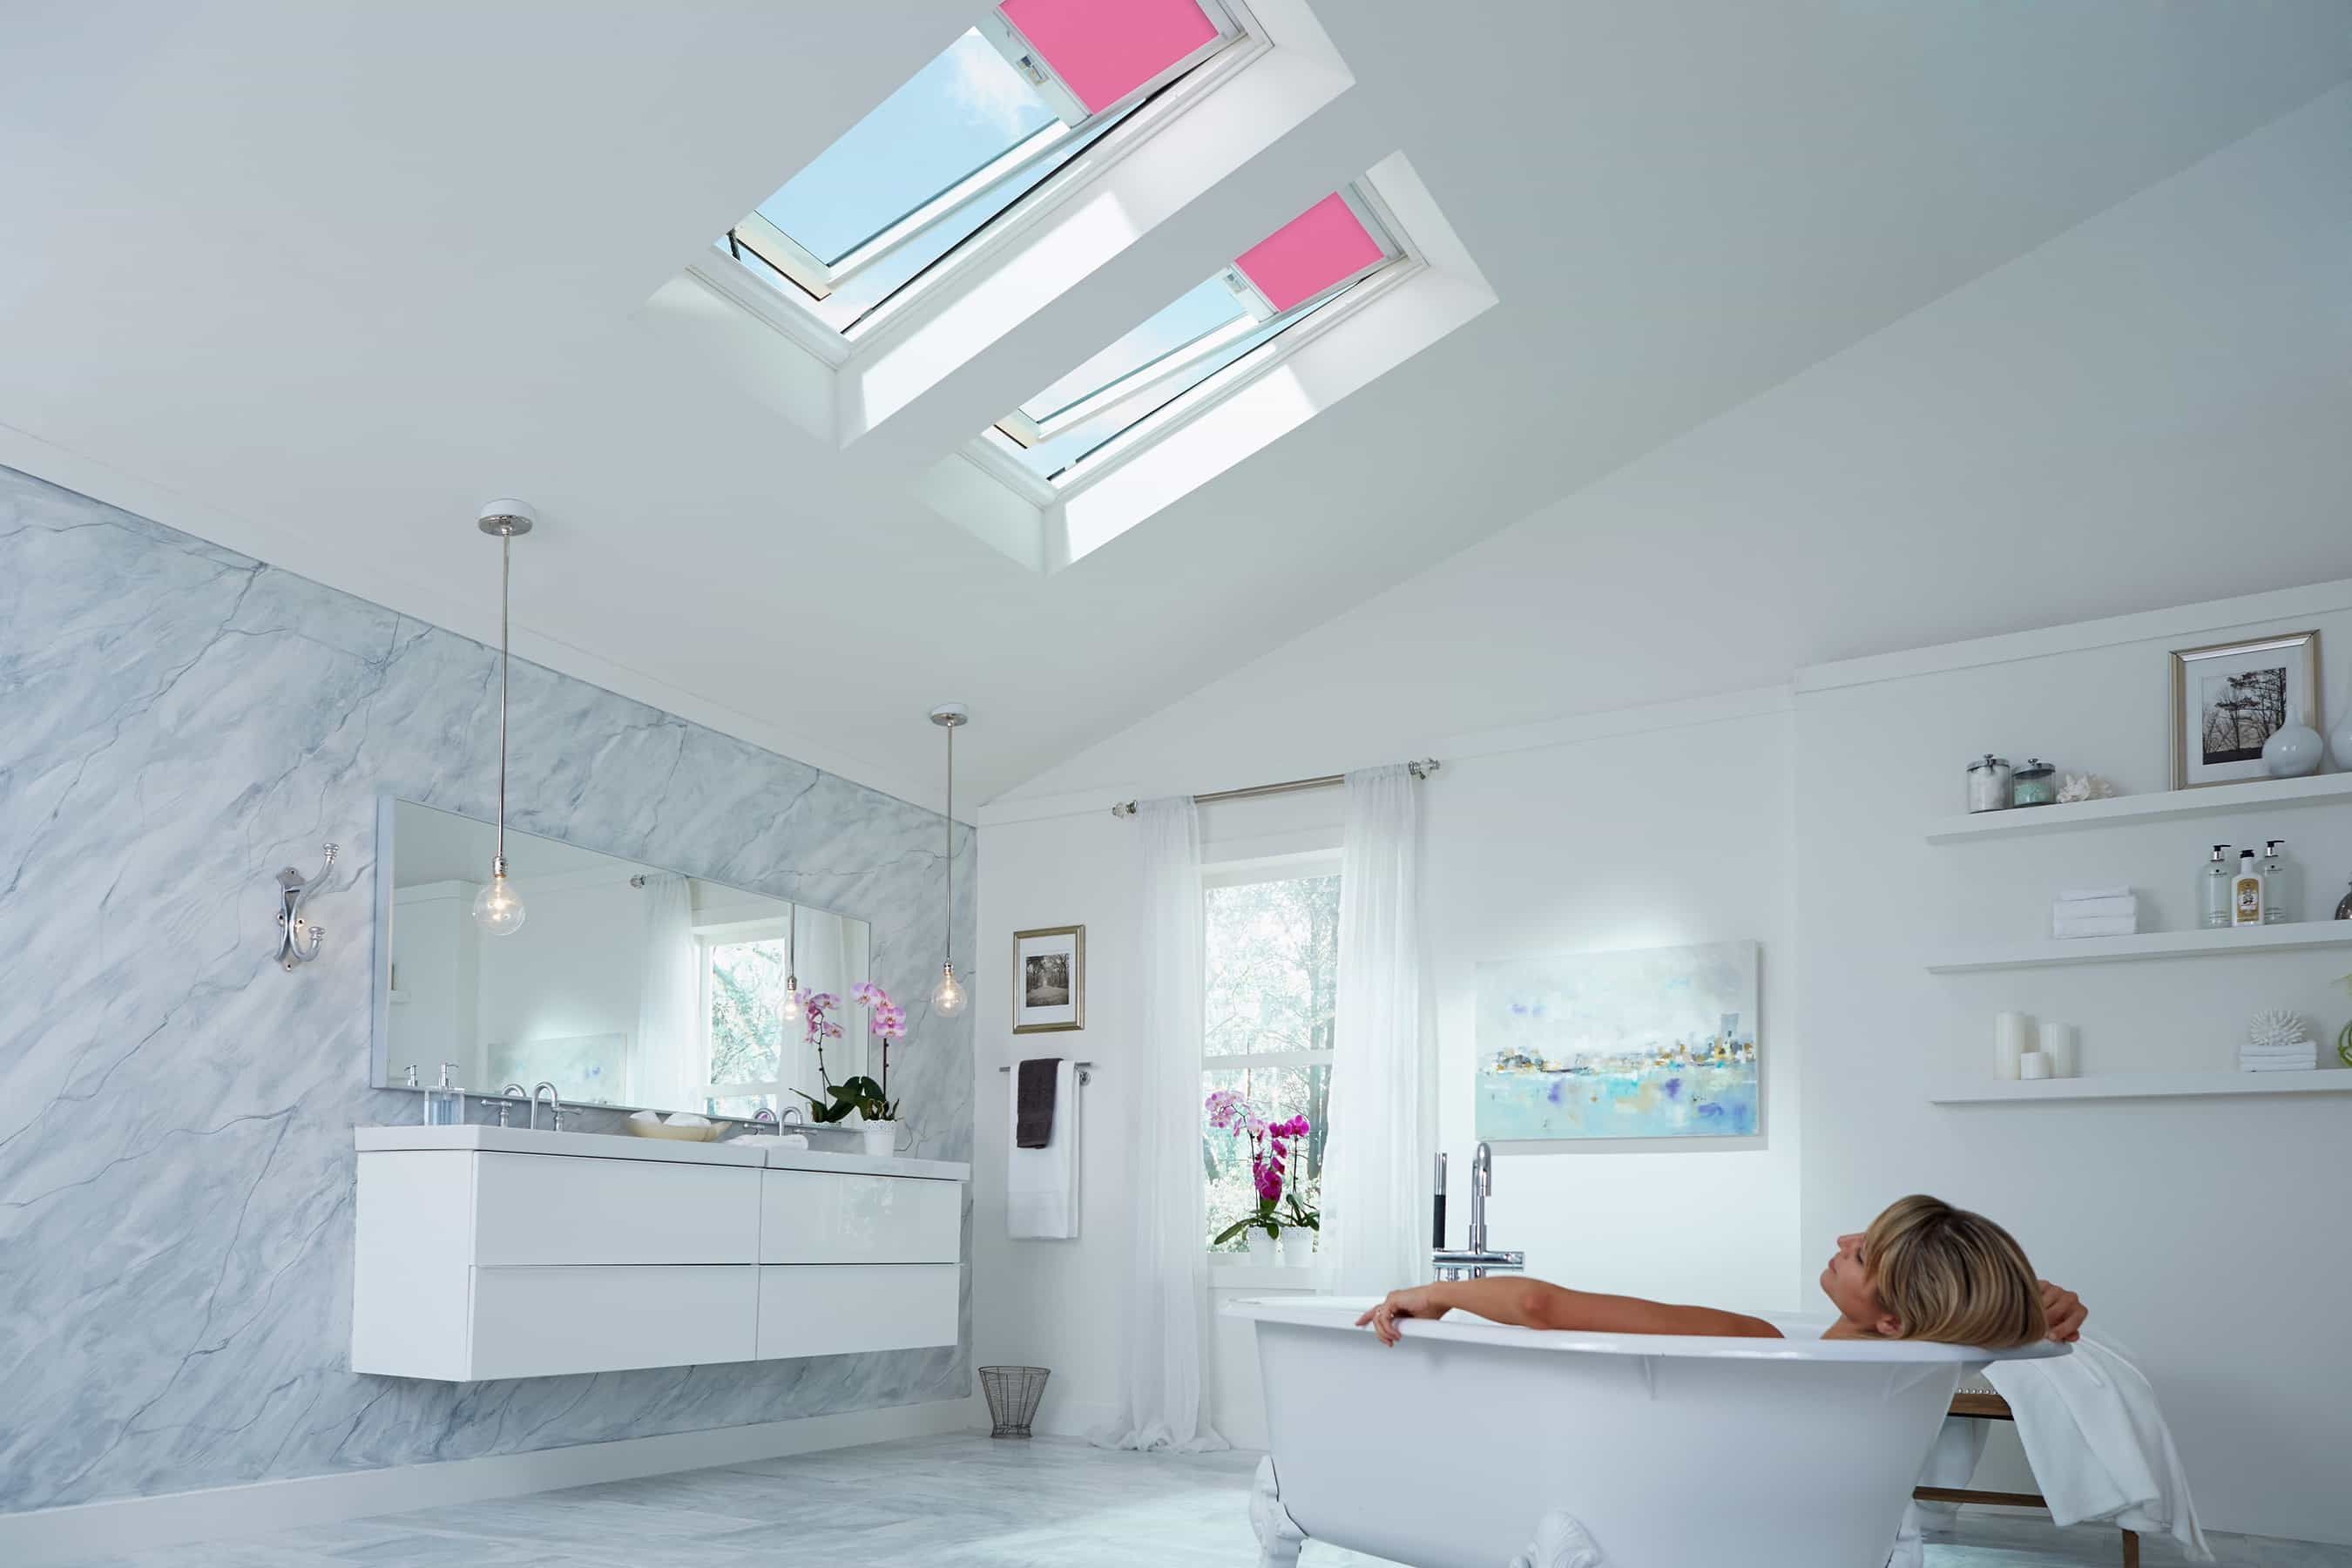 Contemporary Bathroom Interior Featured Skylight Blackout Shade (View 10 of 25)